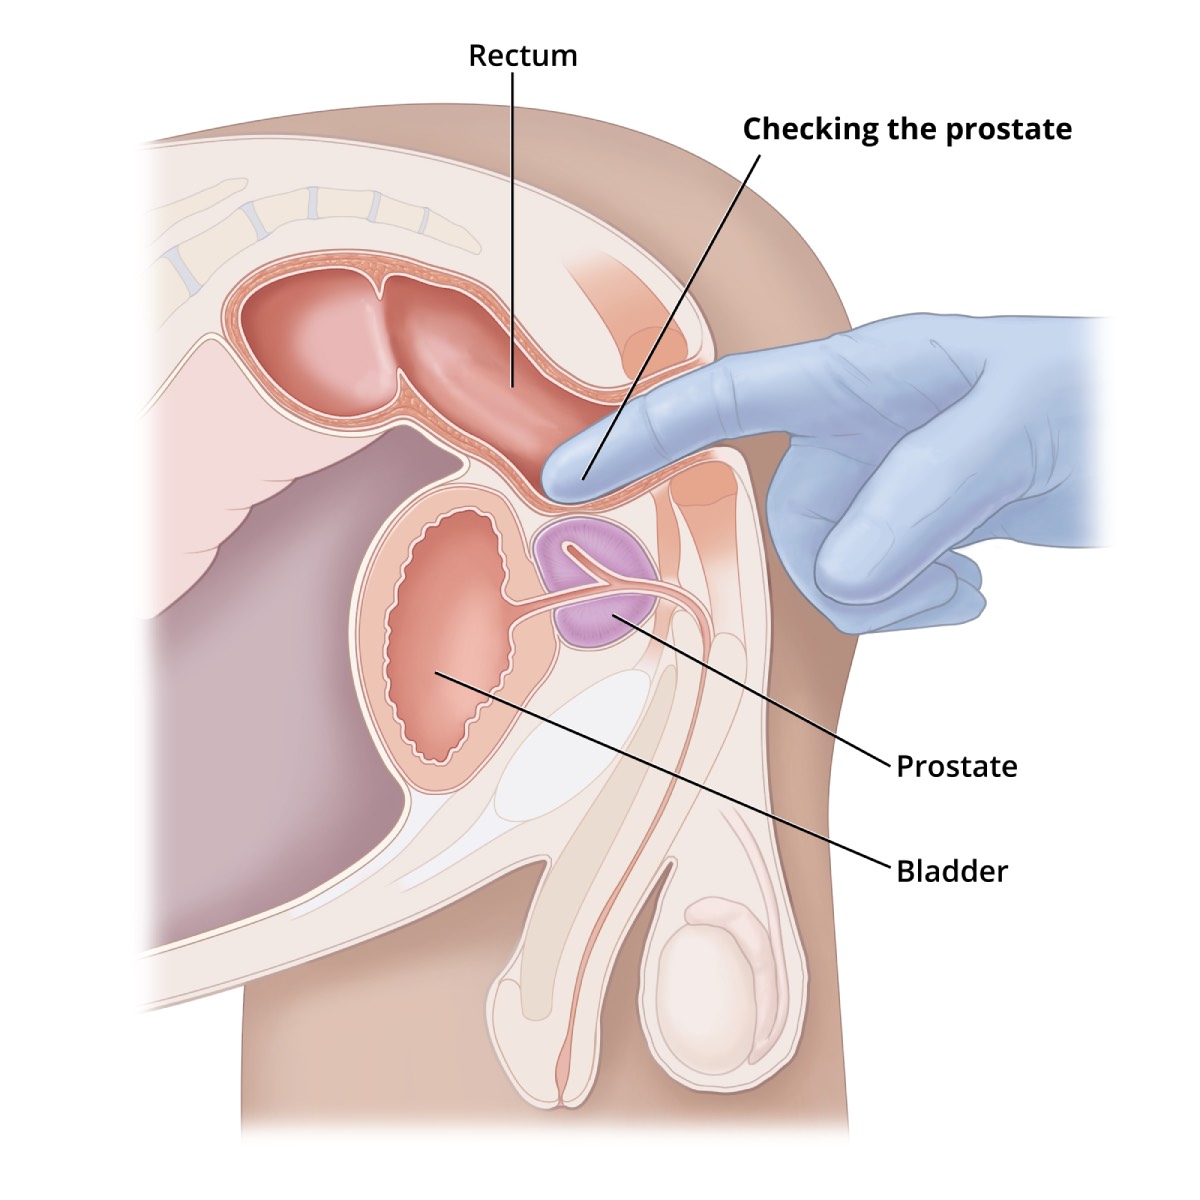 chriz shawn recommends ejaculating during prostate exam pic